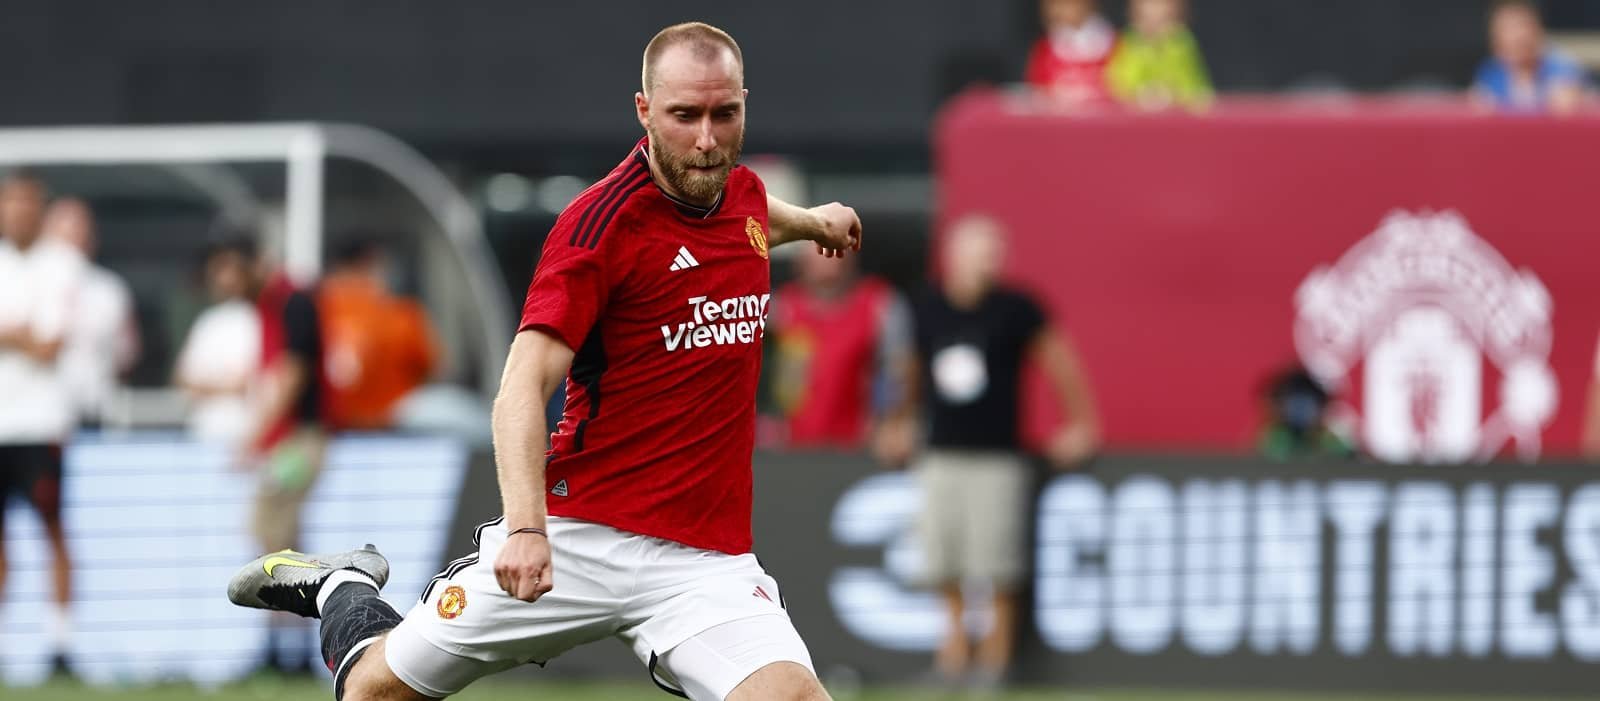 Christian Eriksen showed strong passing game in narrow win over F.C. Copenhagen – Man United News And Transfer News